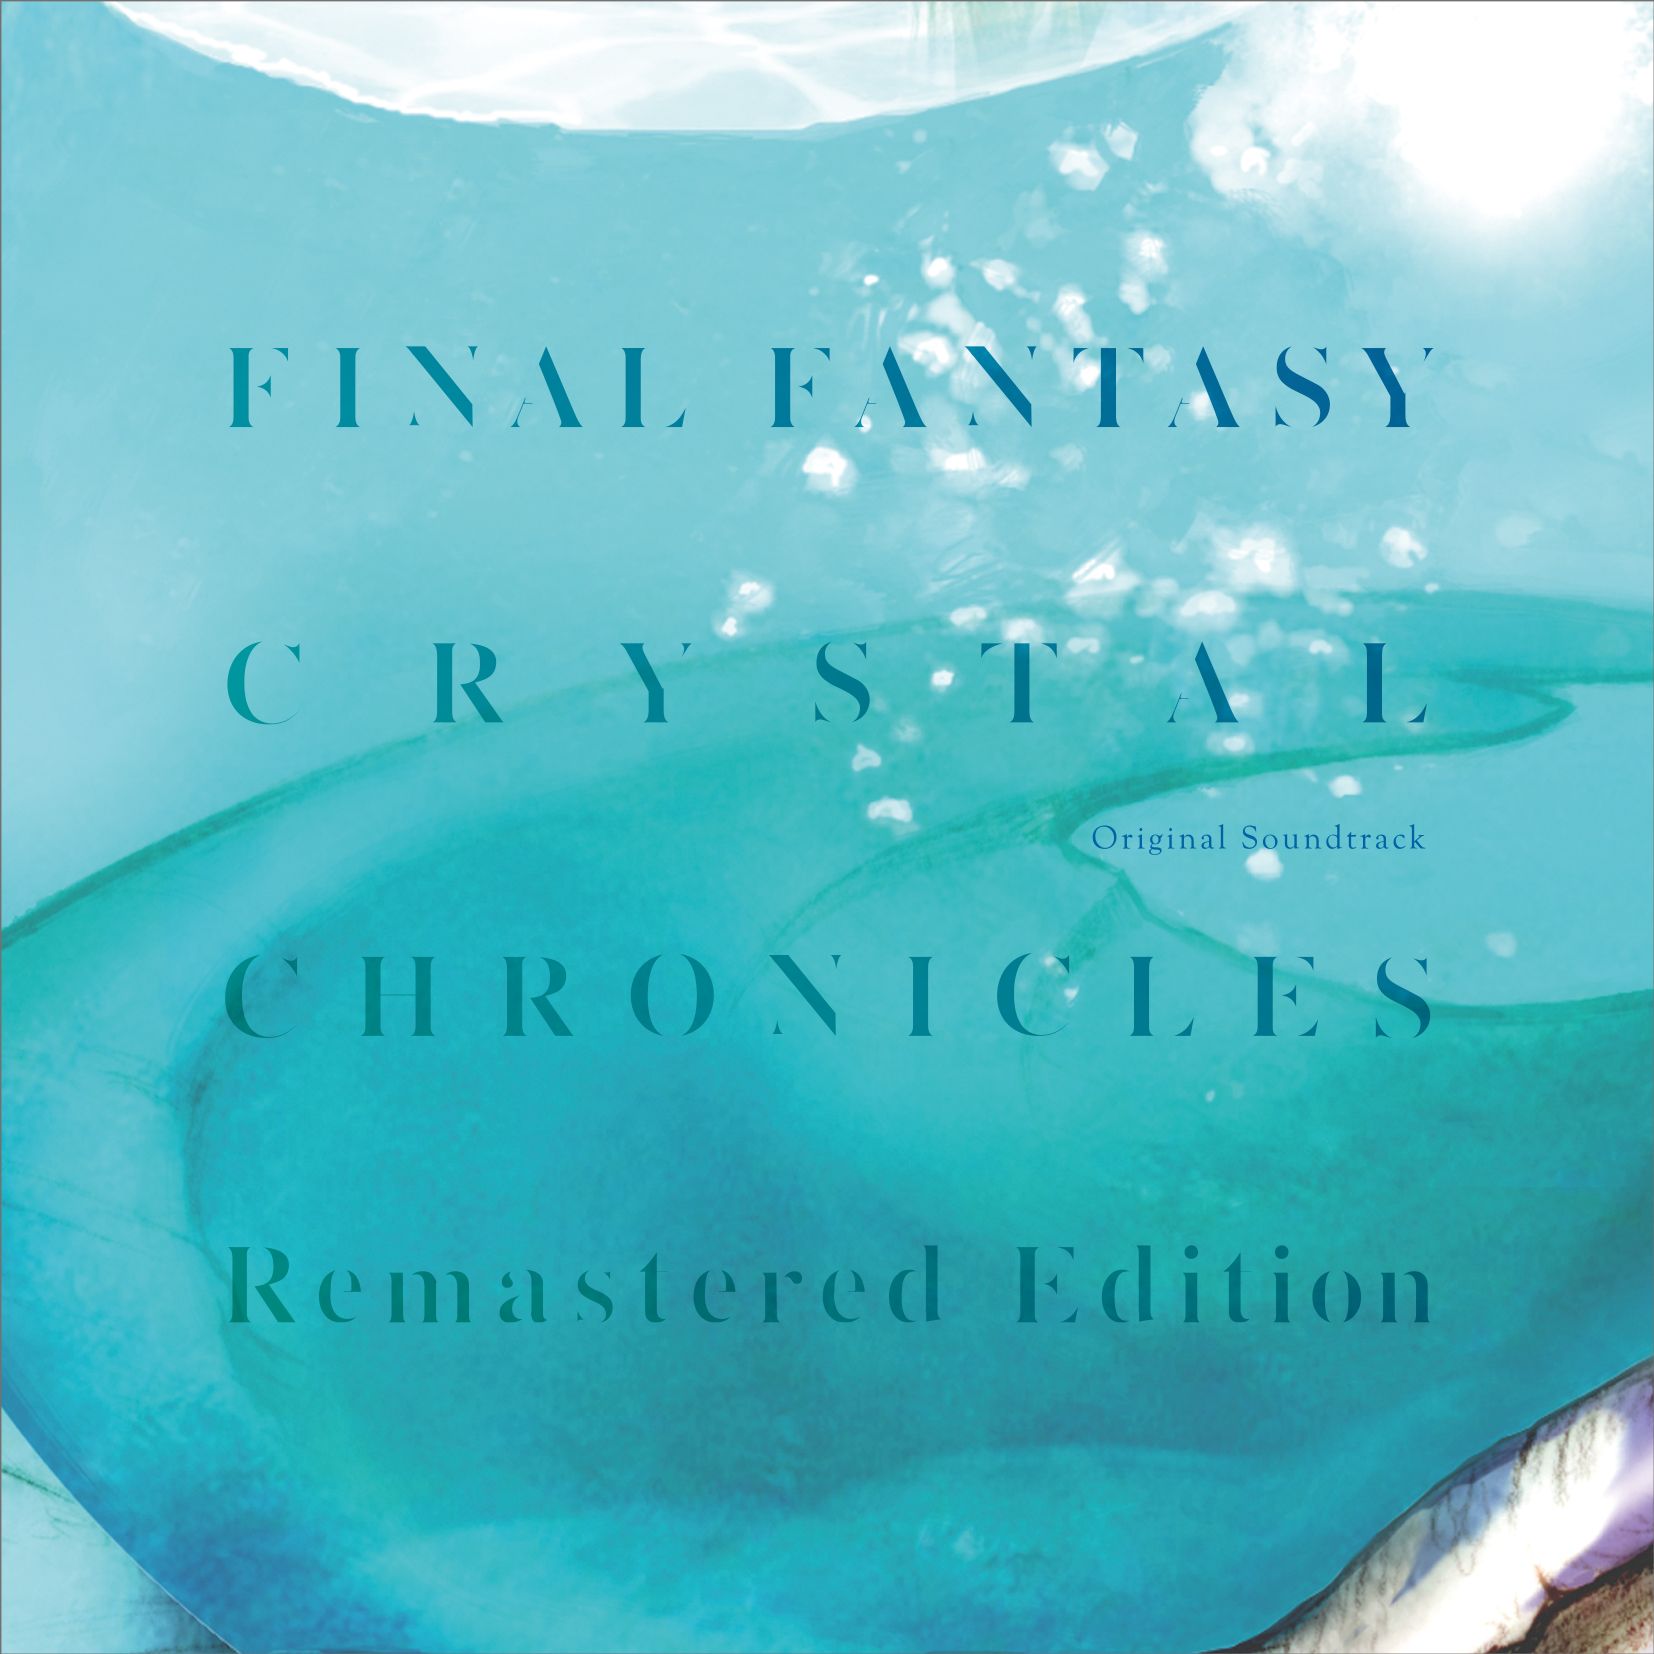 Final Fantasy Crystal Chronicles Remastered Edition Soundtrack